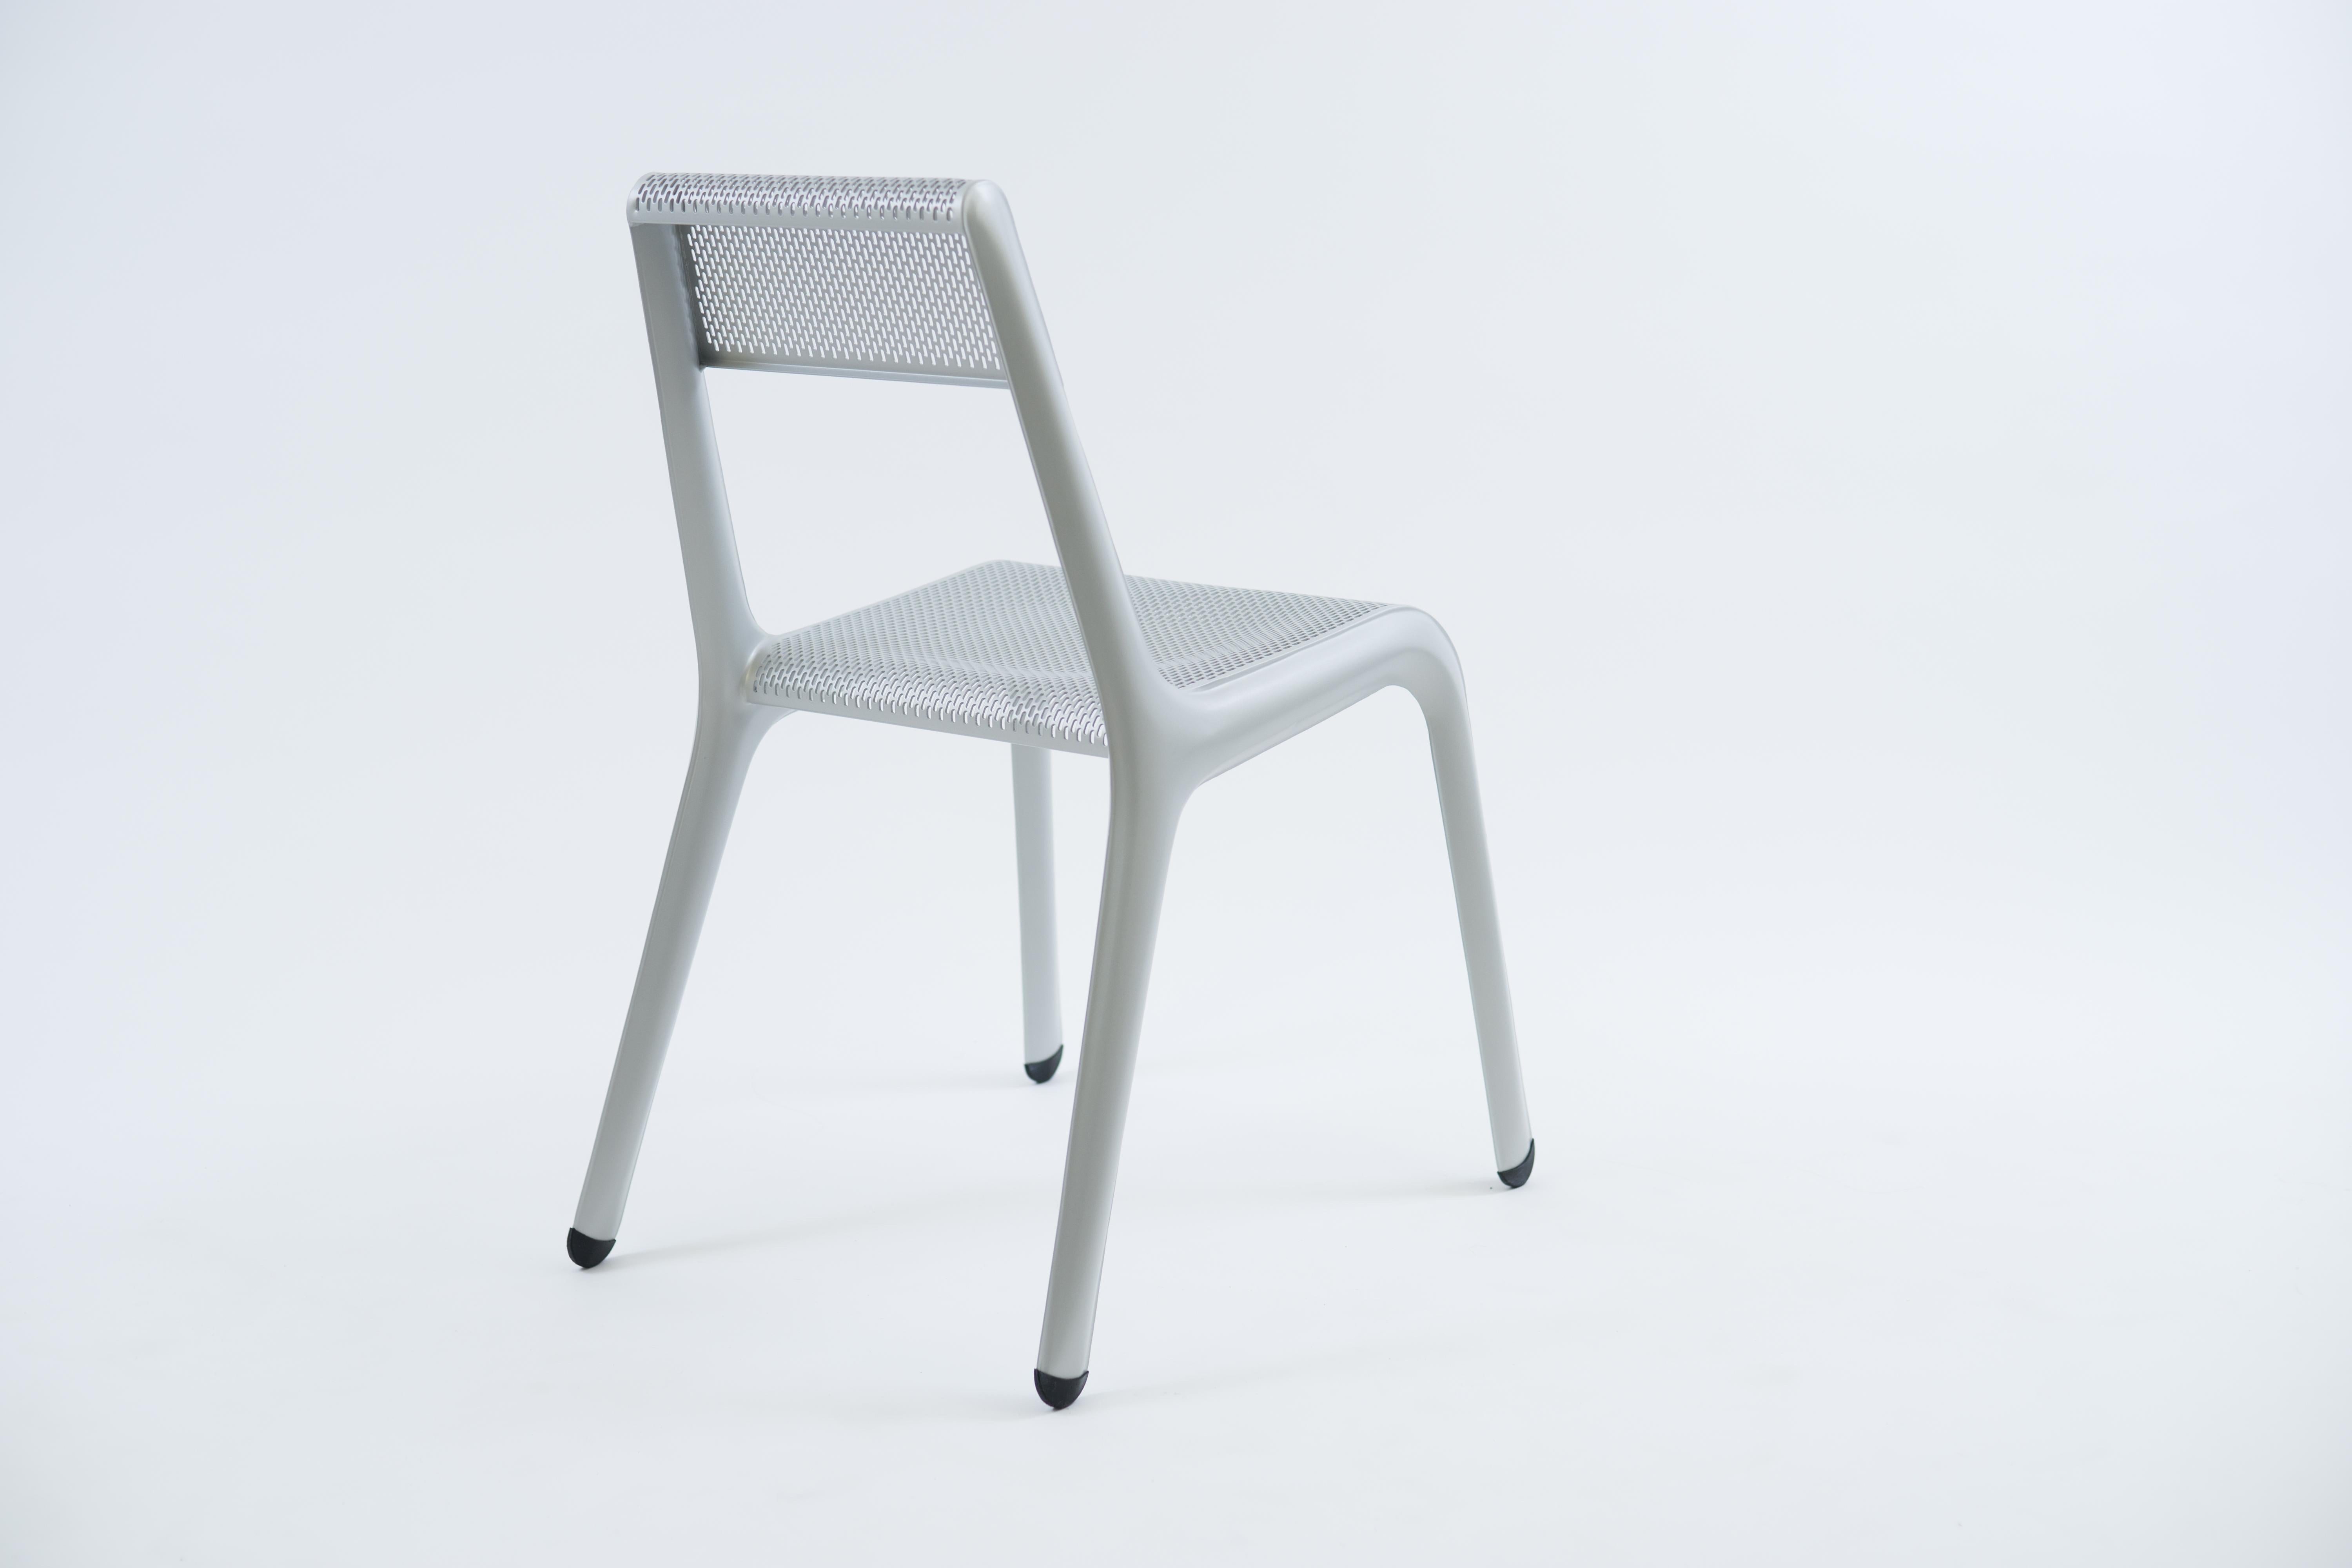 Ultraleggera design fits perfectly the current trends and consumers’ expectations, especially in terms of environment friendly solutions. Pursuant to MMT idea (Mono Material Thinking), the chair is made of just one material – aluminum, what allows